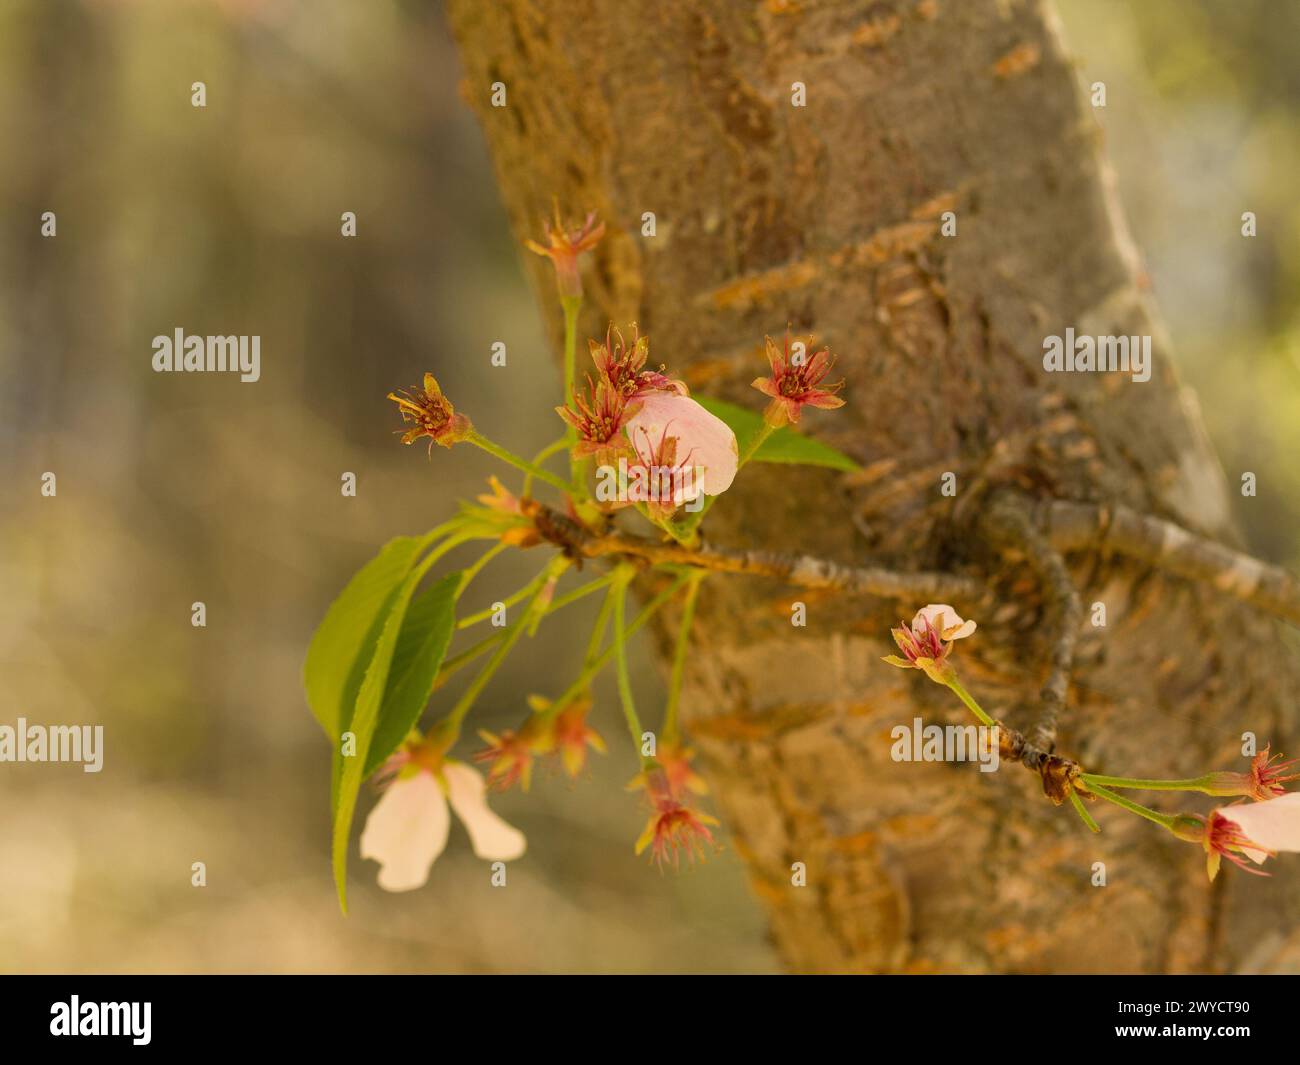 Pink flowers blooming on a tree branch Stock Photo